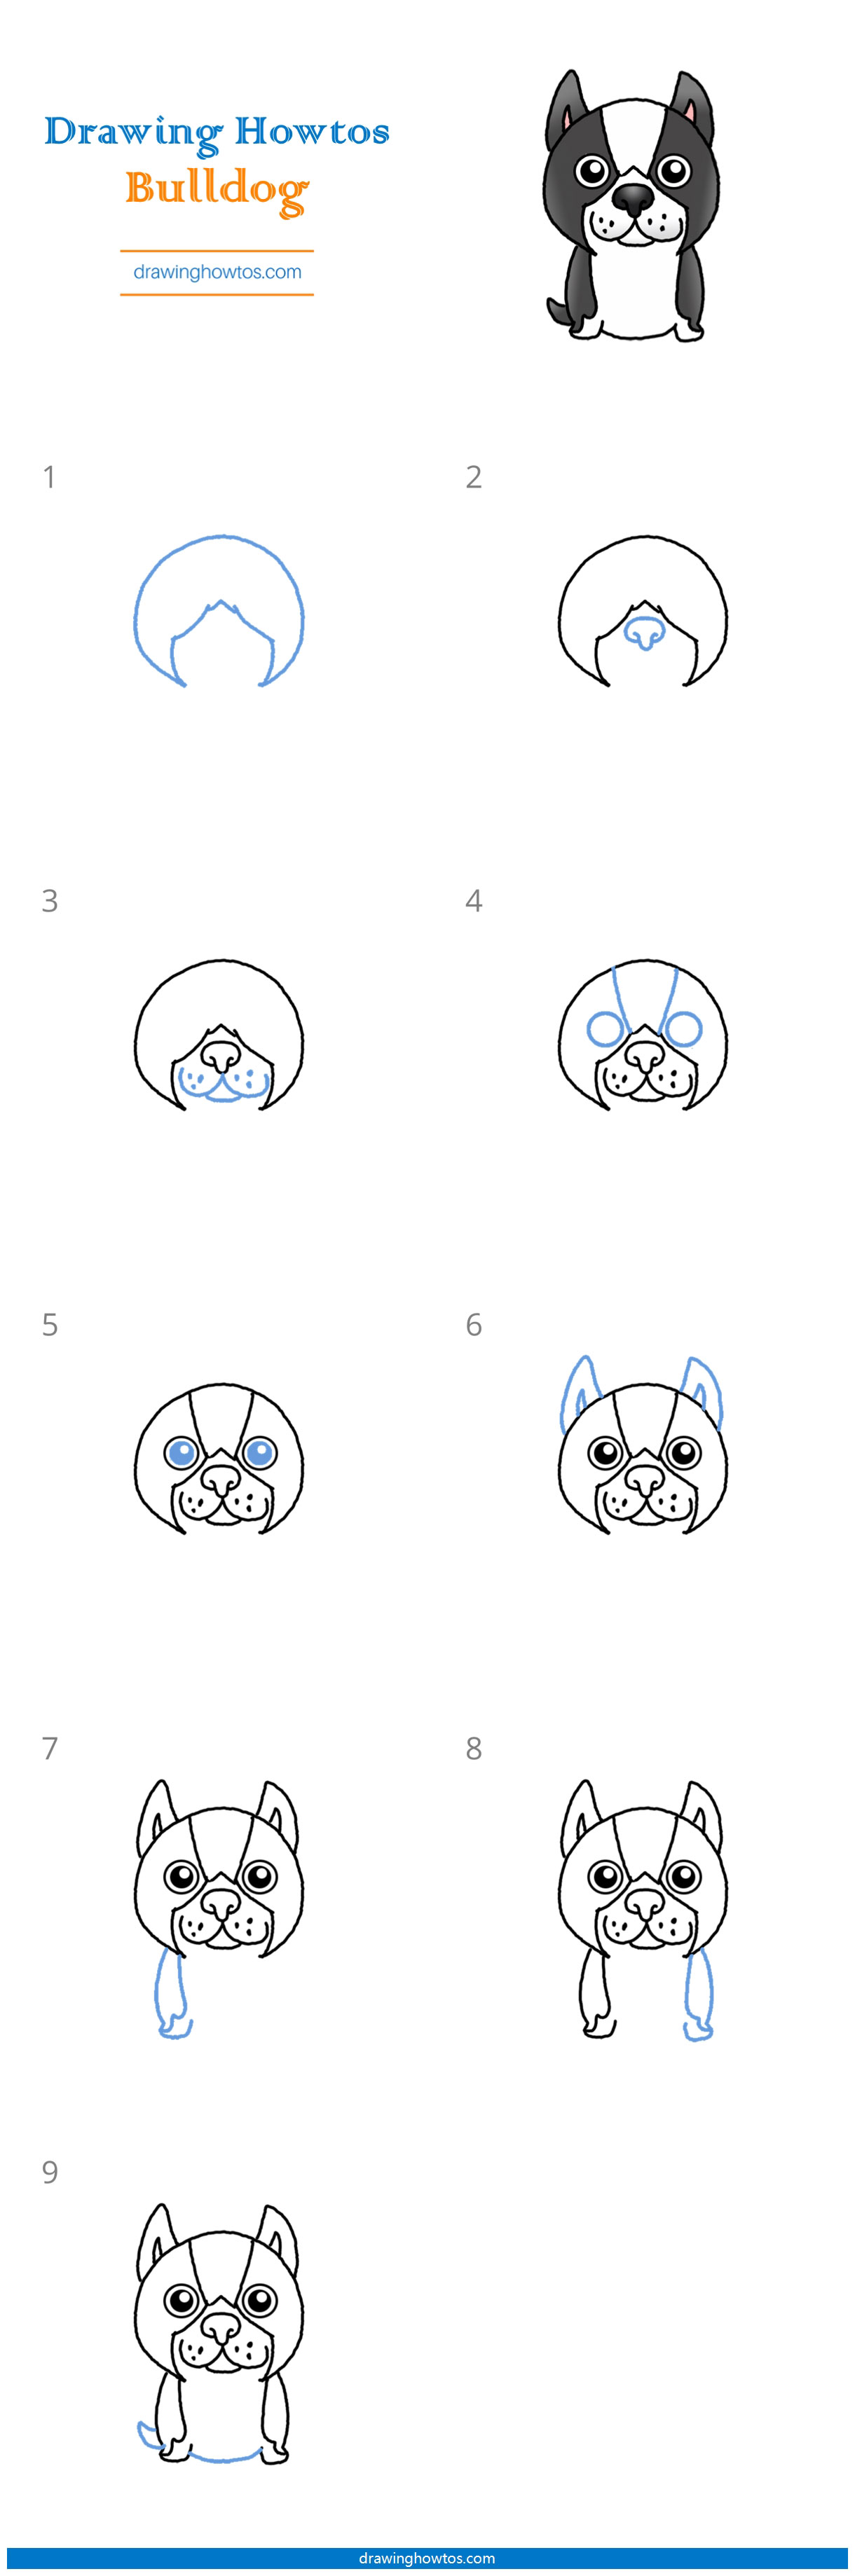 How to Draw a Bulldog Step by Step